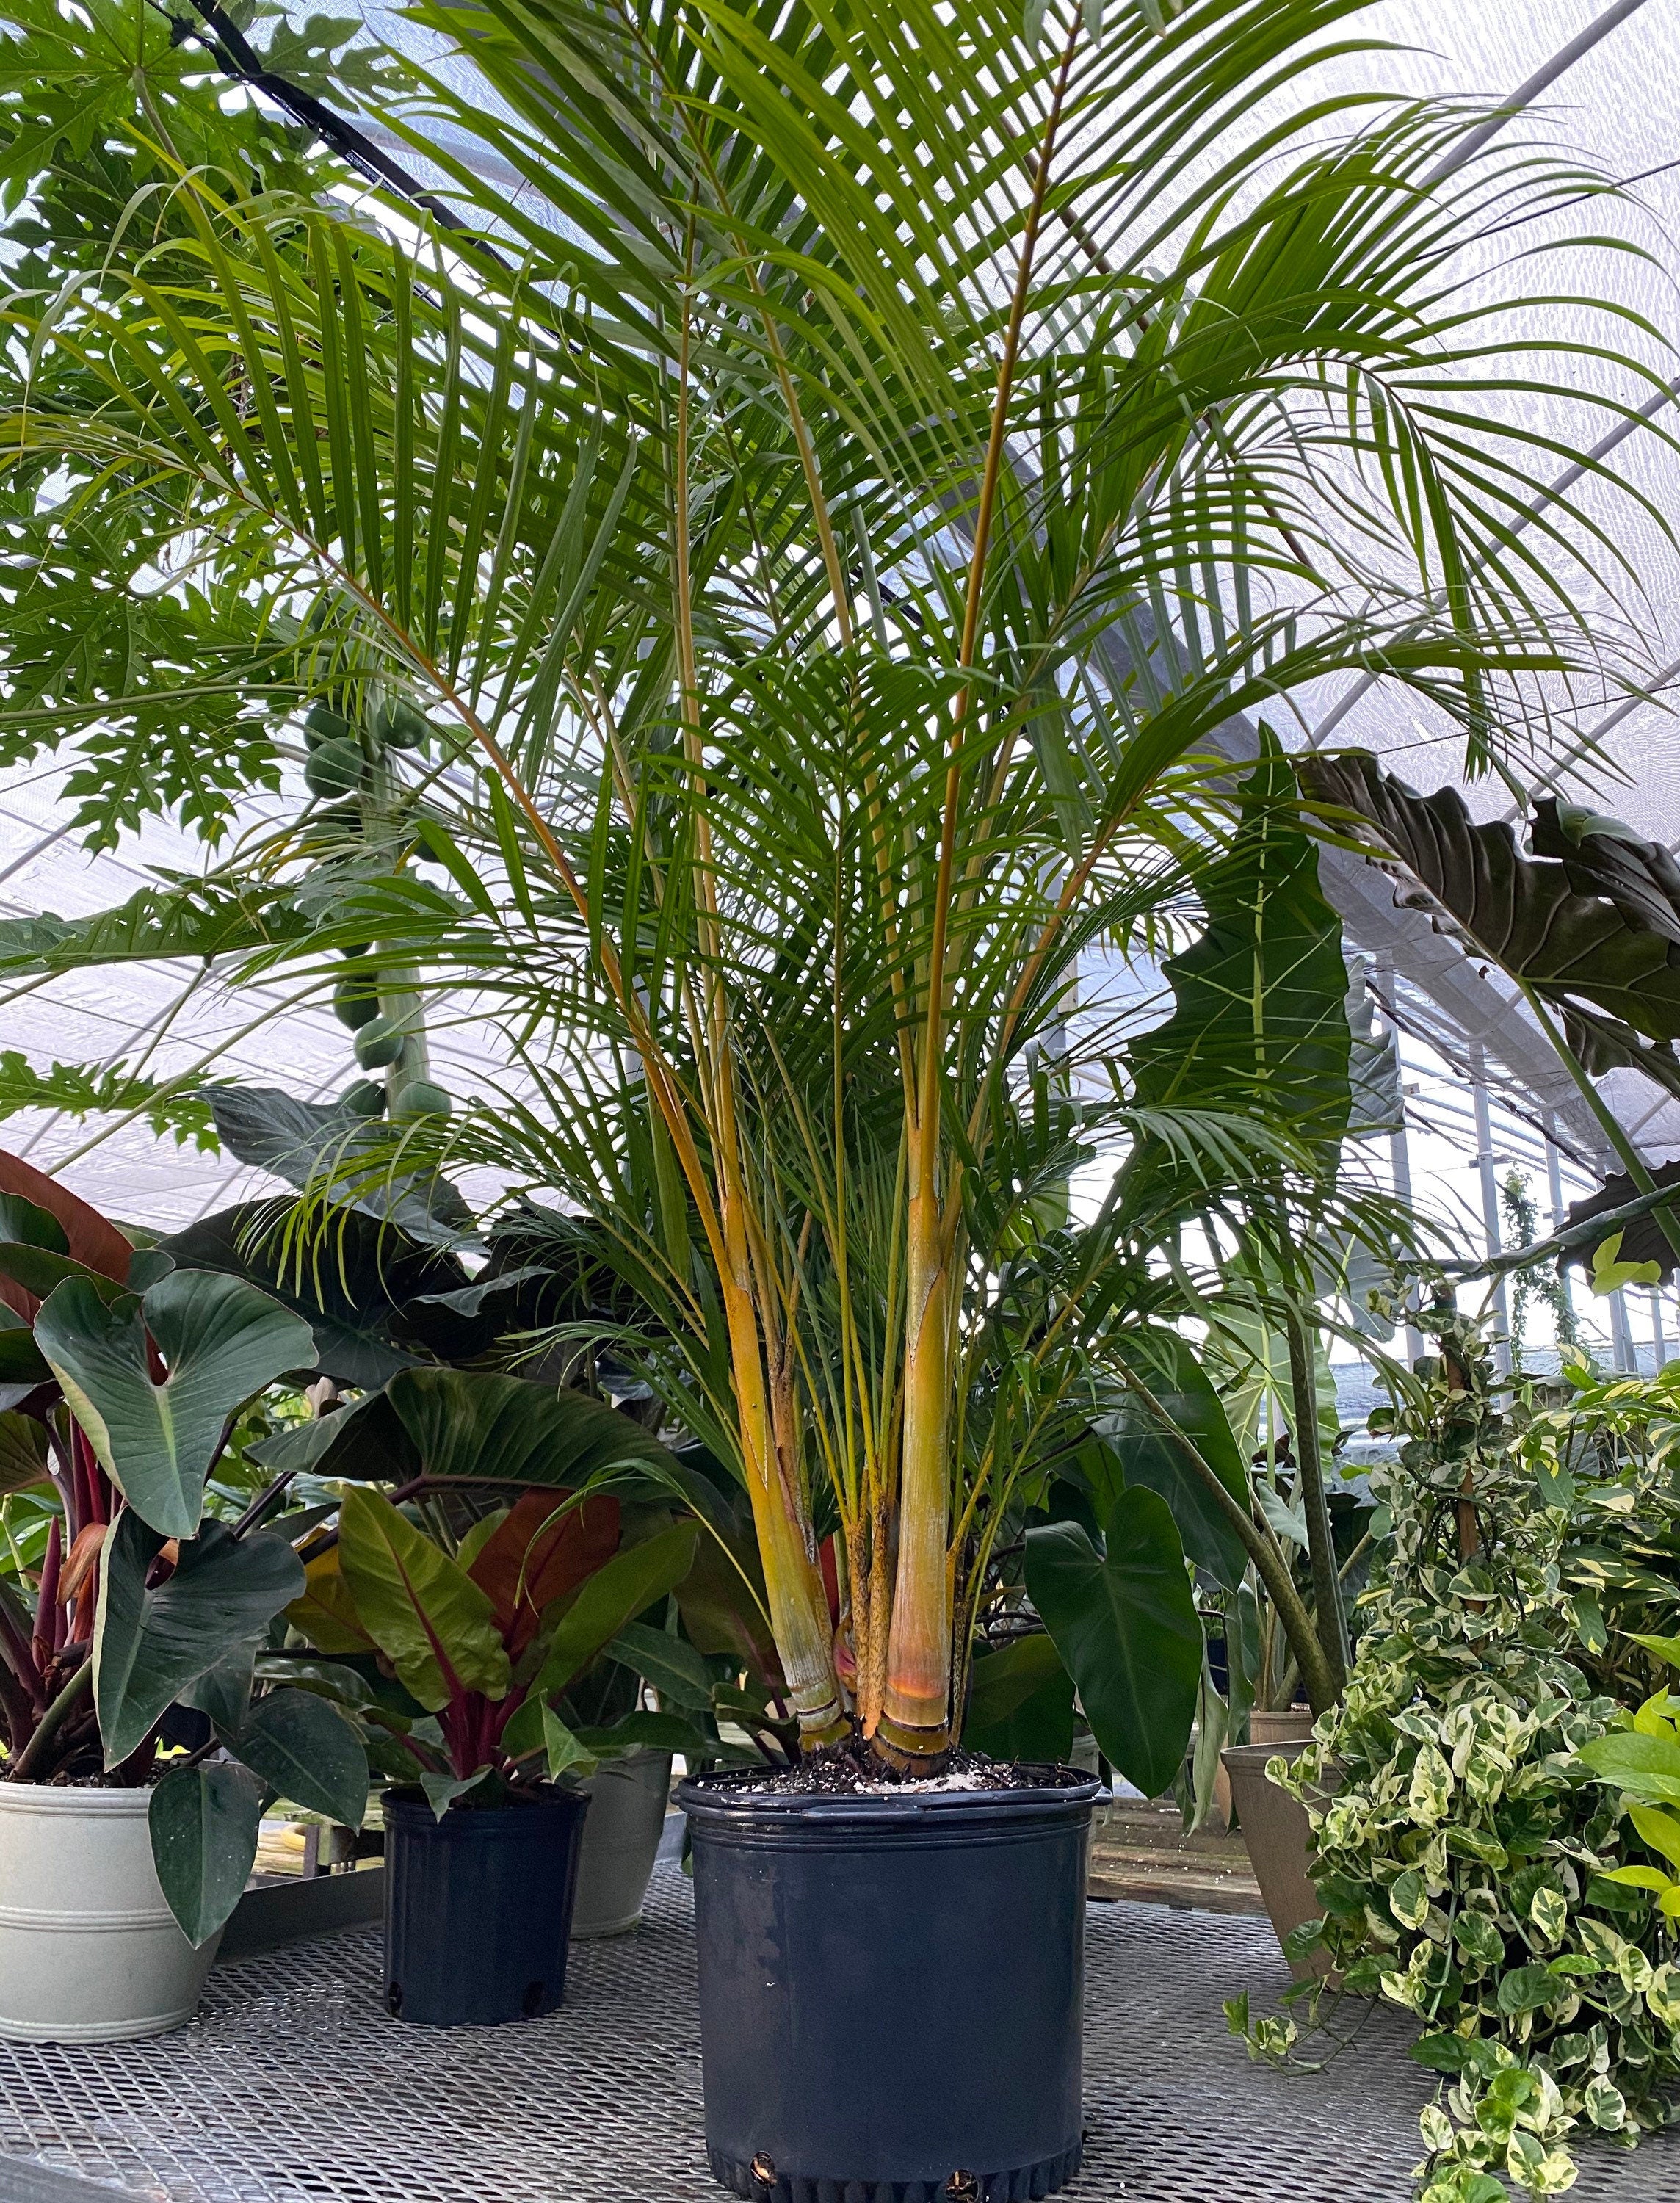 outside view of Areca Palm, Golden Cane, Dypsis Lutescens